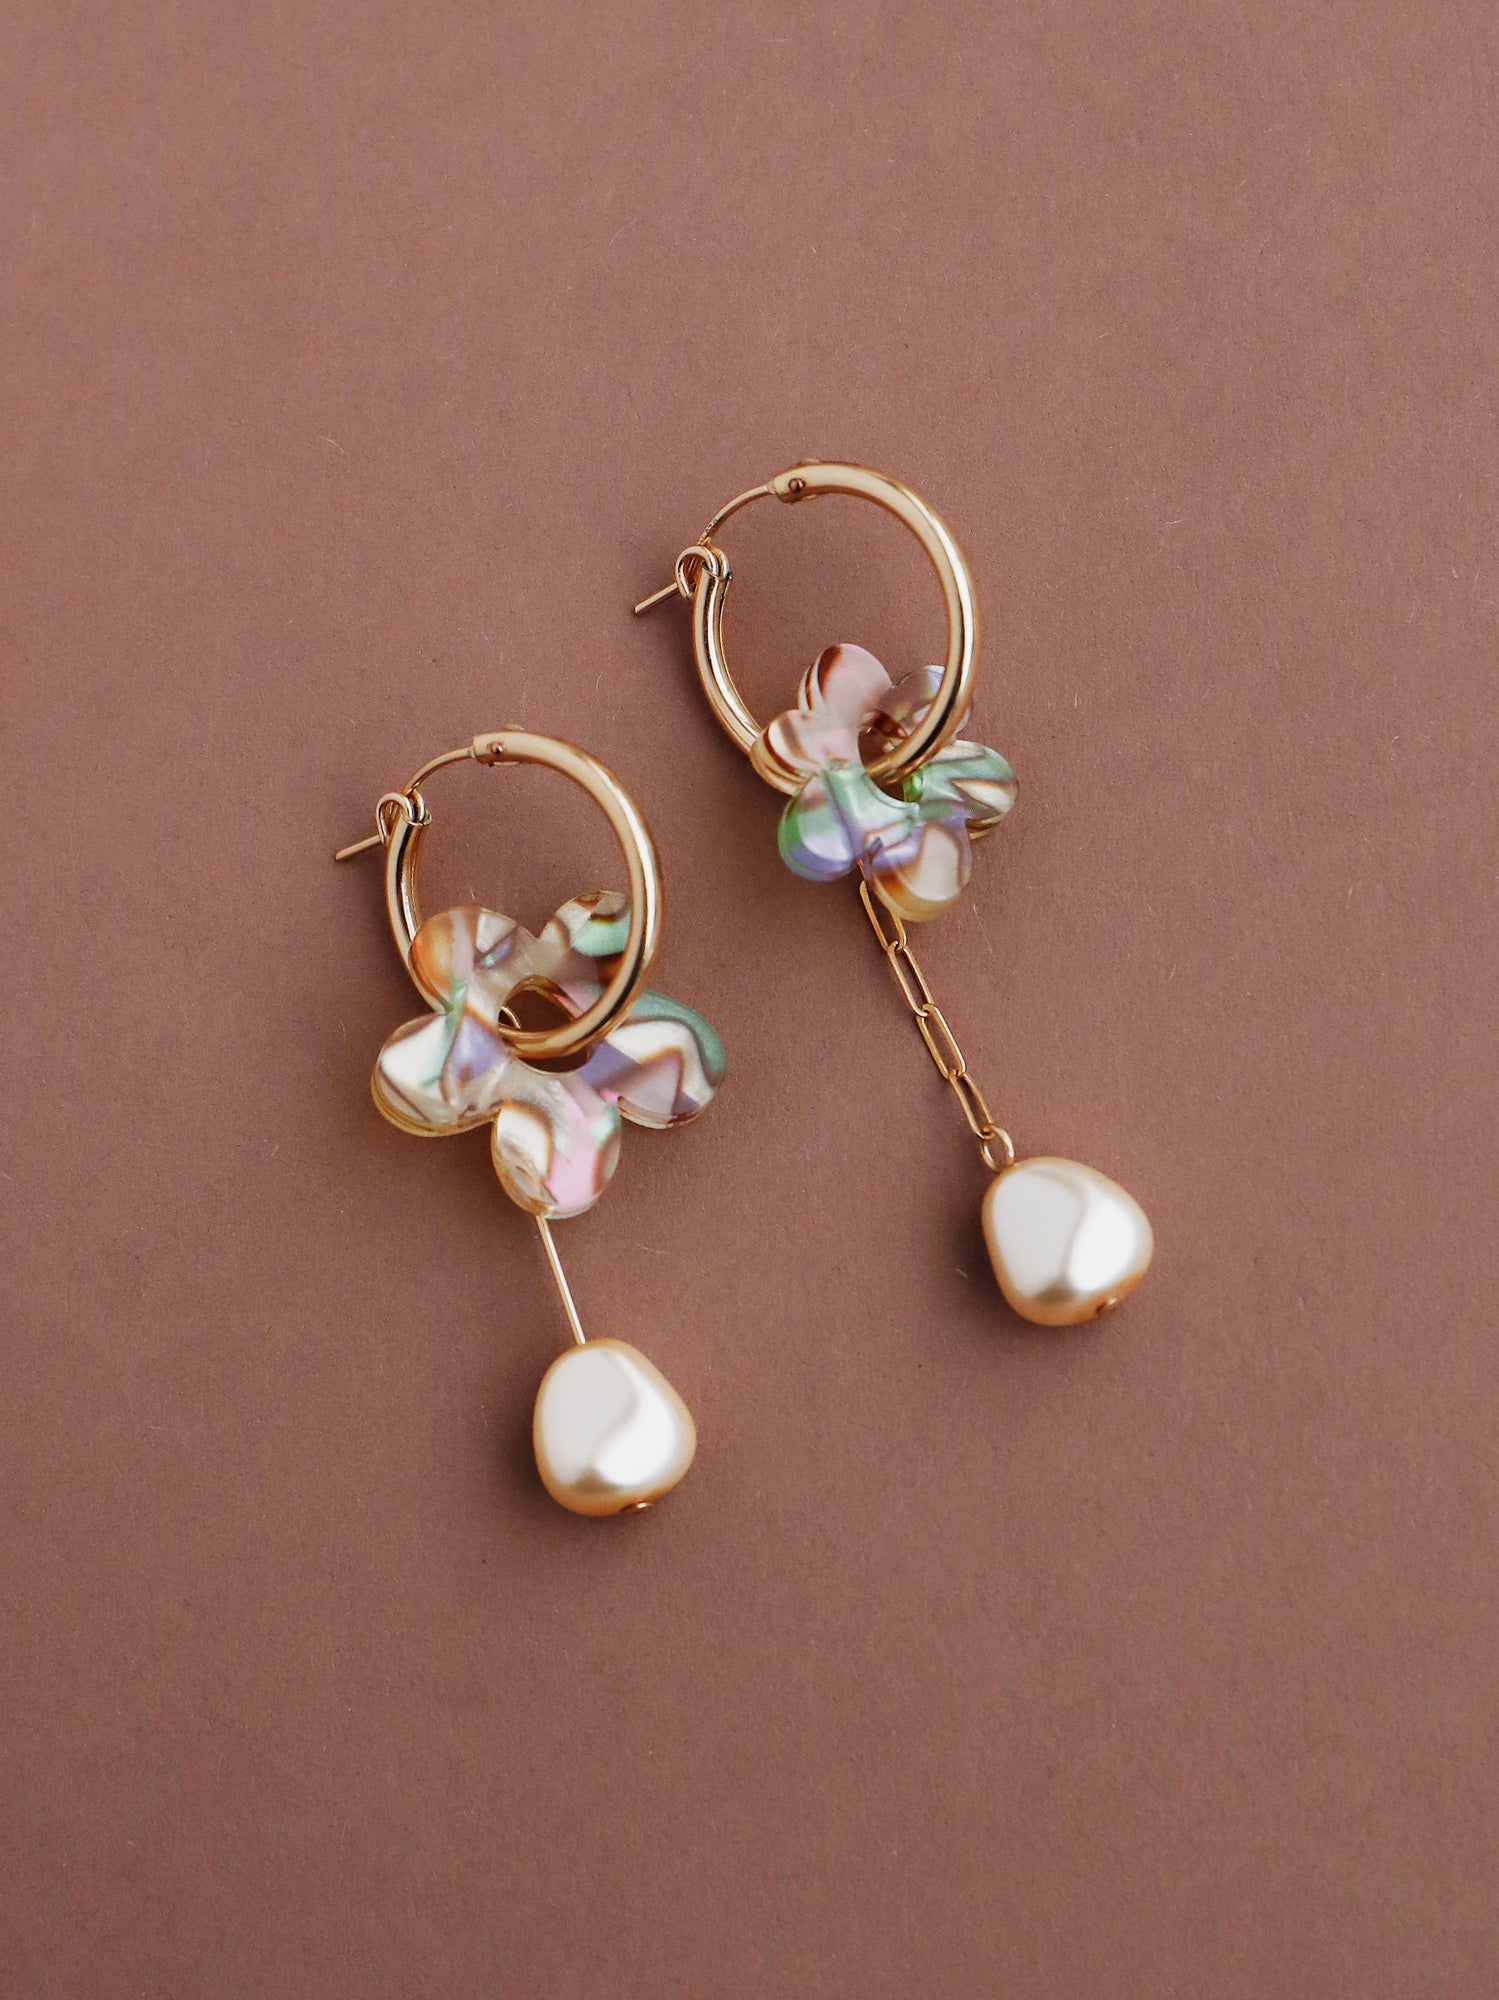 Ripple effect flower charms made from our recycled acrylic. Czech glass baroque pearls and 14k gold-filled hoops. Handmade in the UK by Wolf & Moon.